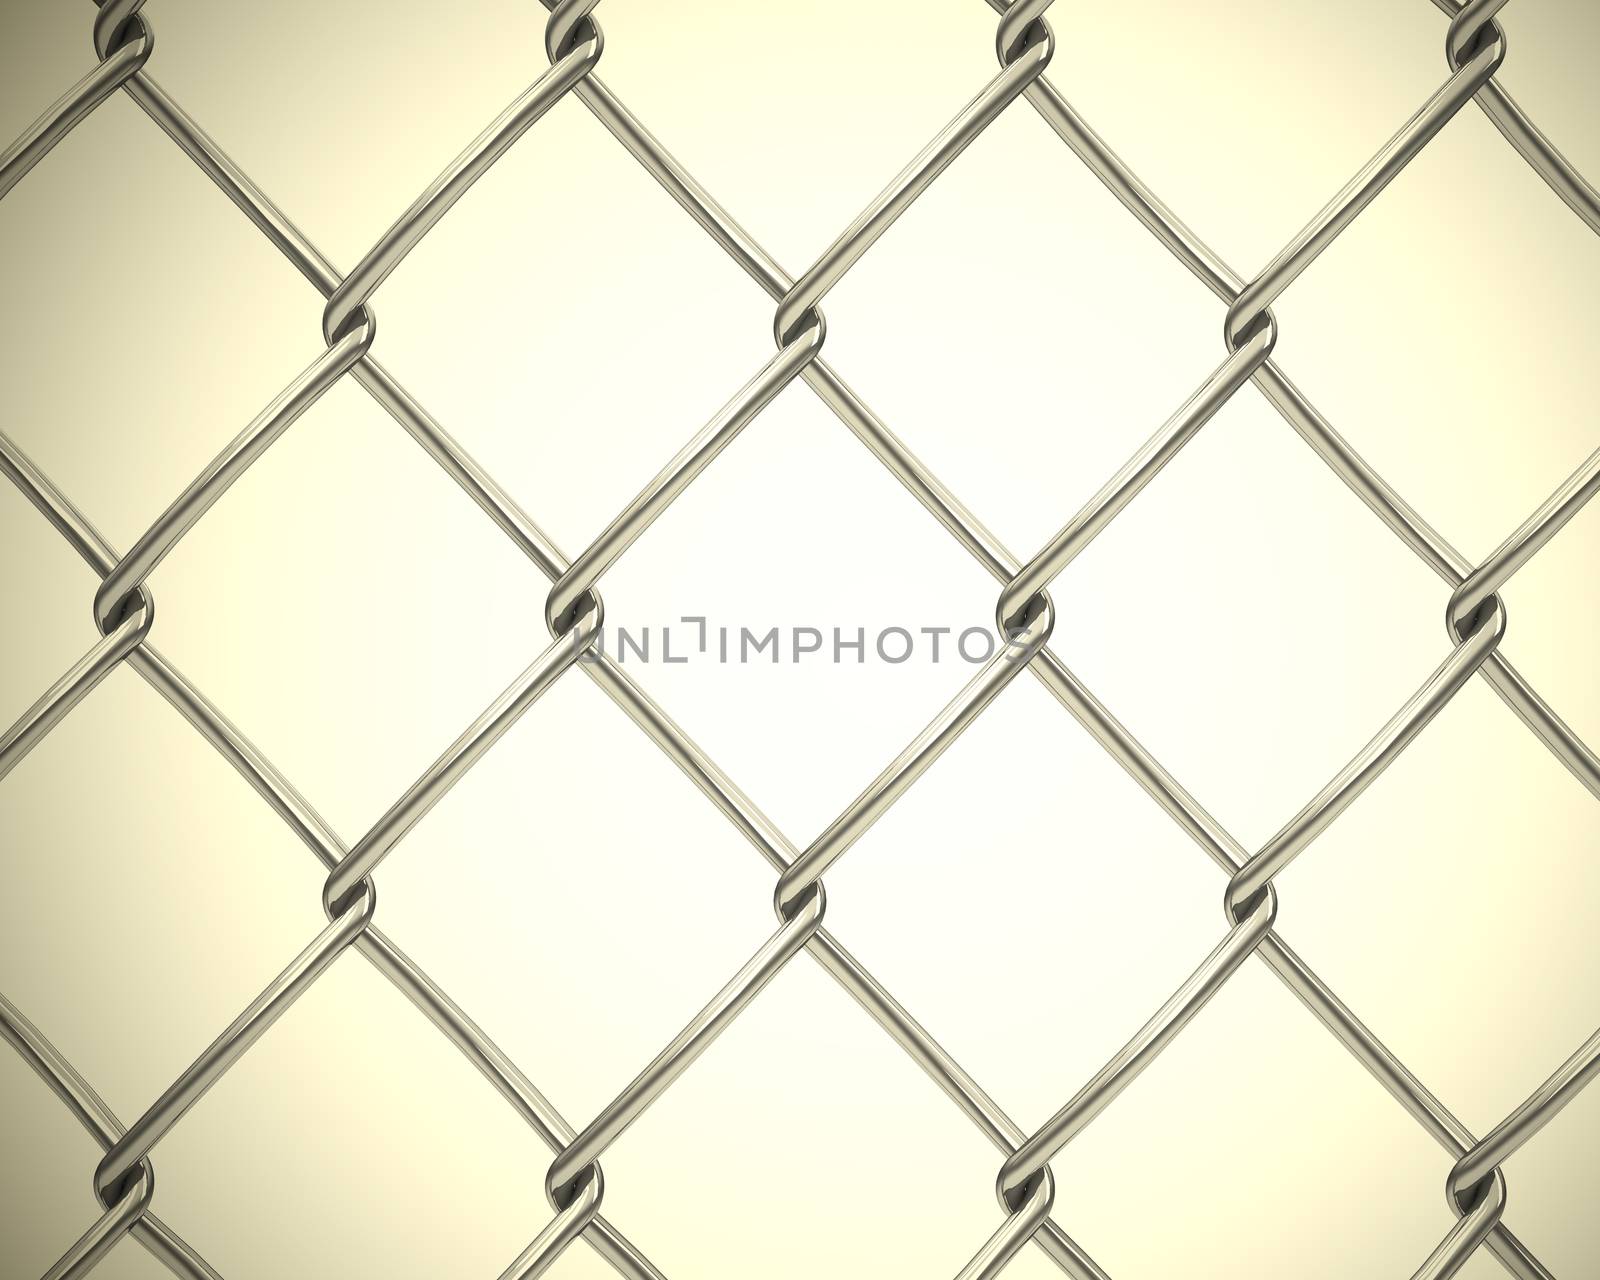 3d generated picture of a steel wire fence